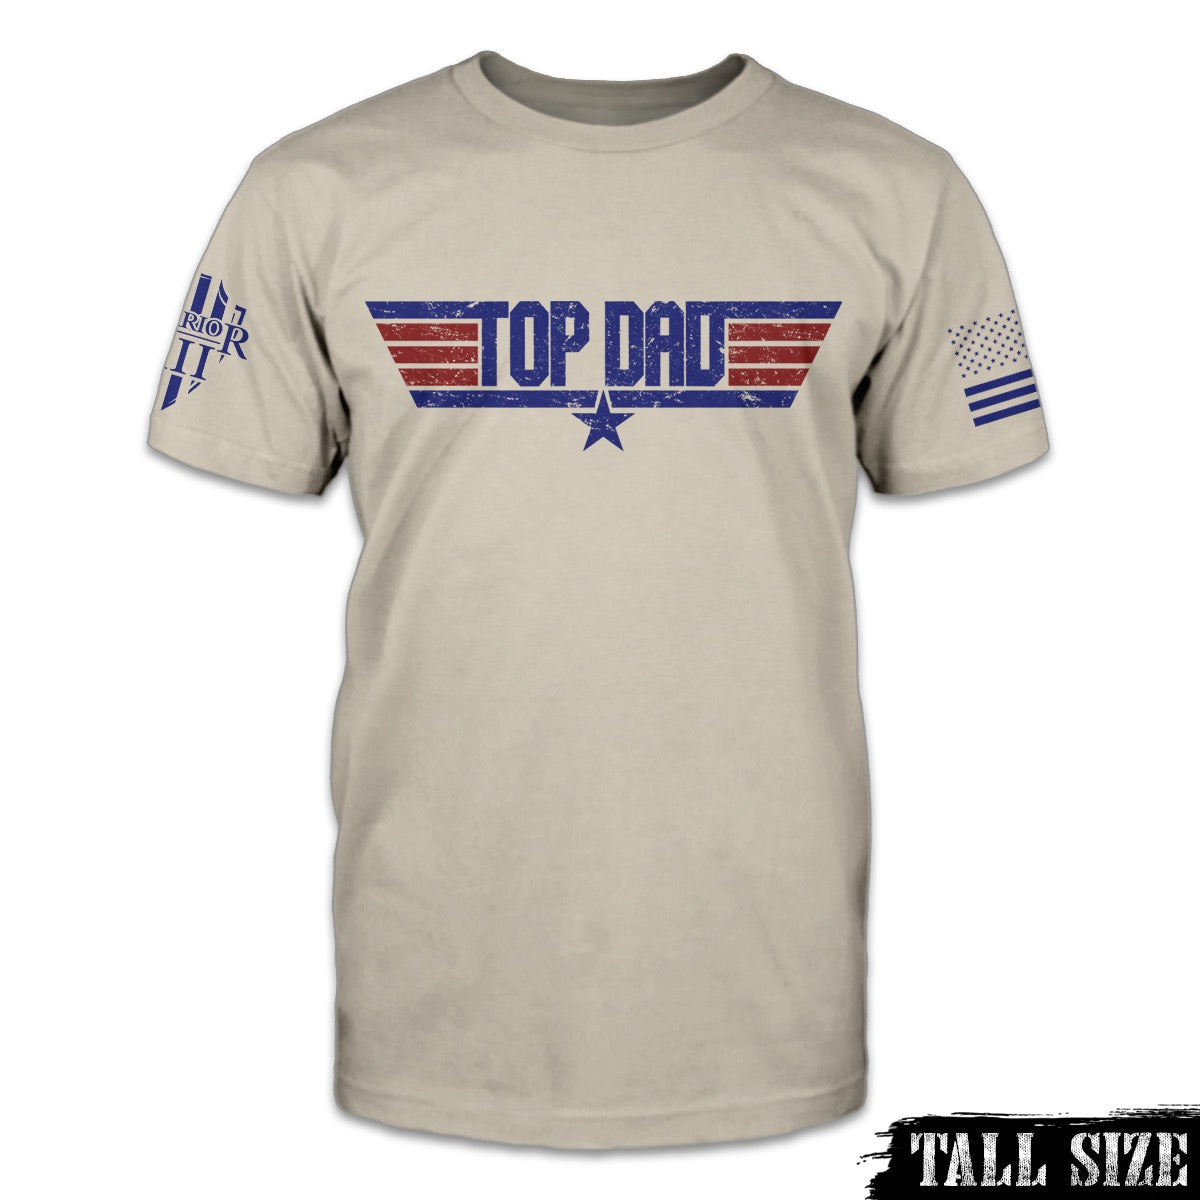 A light tan tall size shirt with the words "top dad" printed on the front.